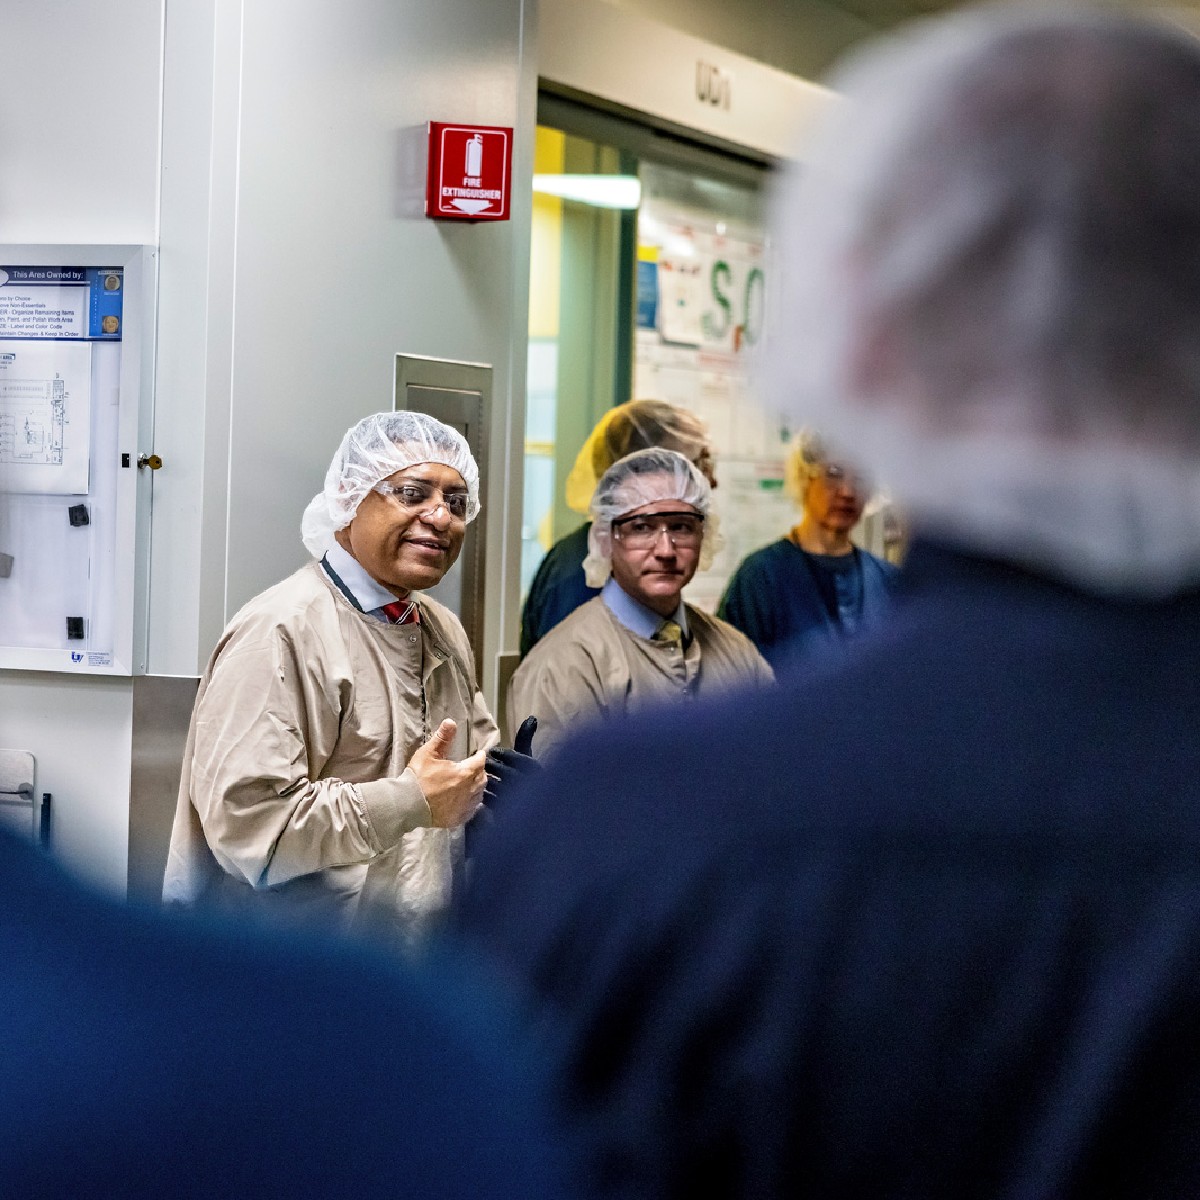 We were honored to host @ONDCP Director @DrGupta46 at our Columbus, Ohio manufacturing site for a visit and dialogue on the US opioid epidemic, and how industry, government, and others can work together to meet the urgent needs of patients and communities. brnw.ch/21wHfQb